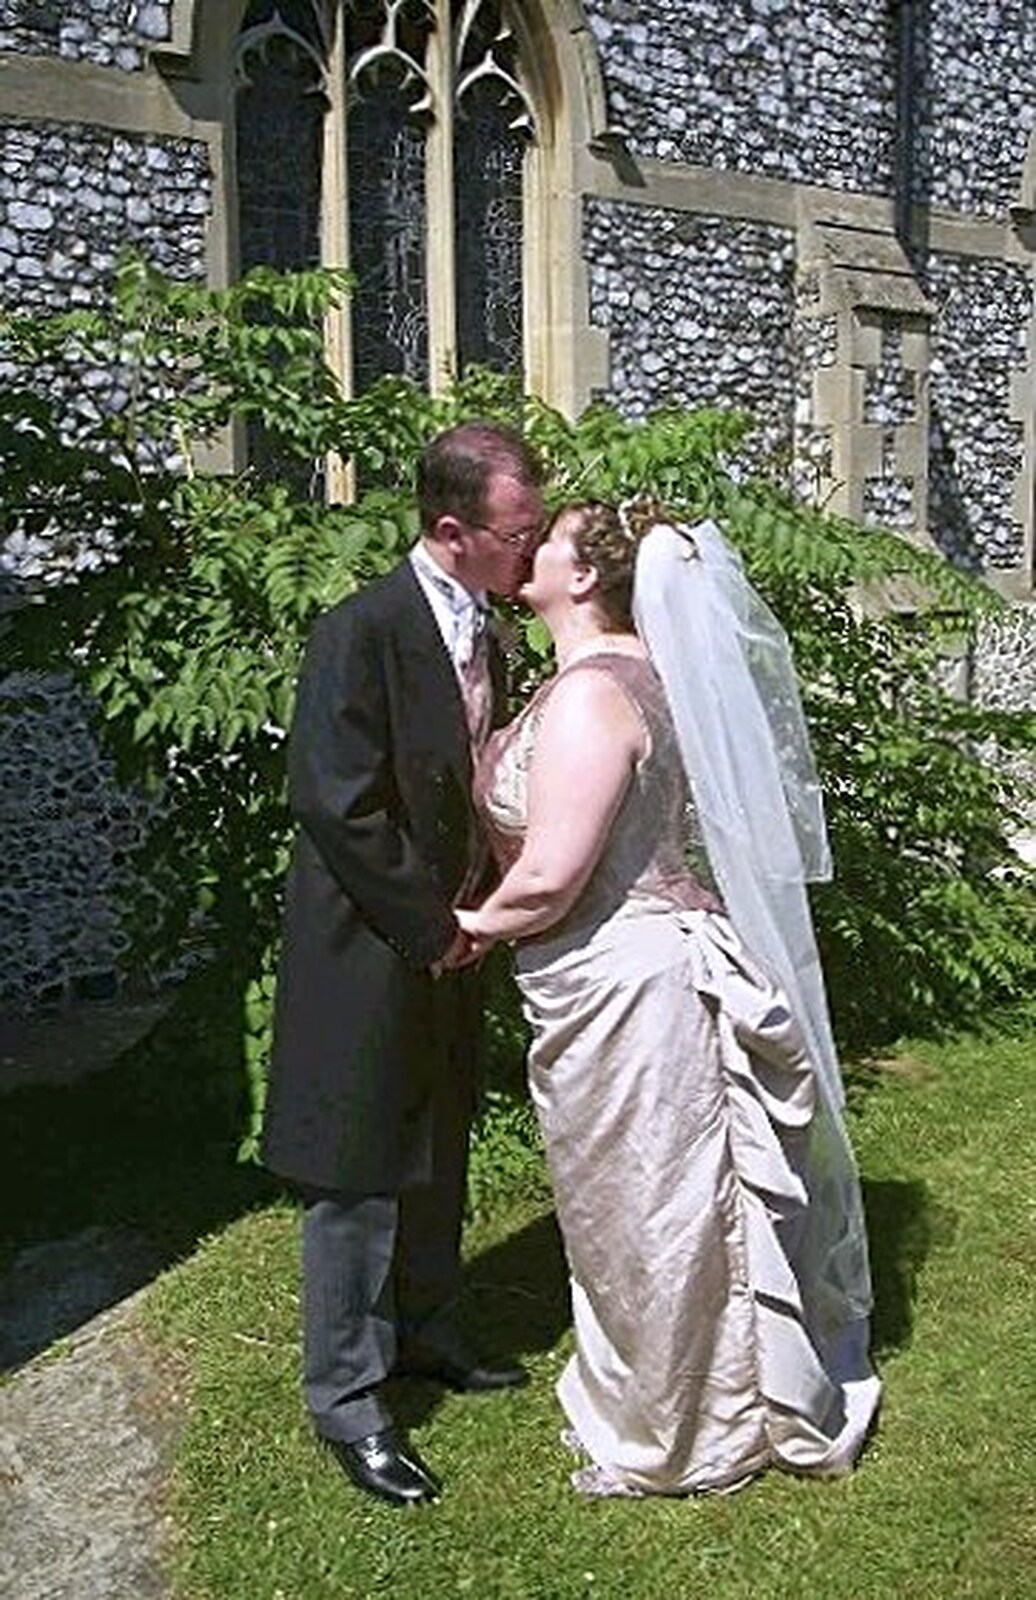 Time for a wedding snog from Phil and Lisa's Wedding, Woolverston Hall, Ipswich, Suffolk - 1st July 2001